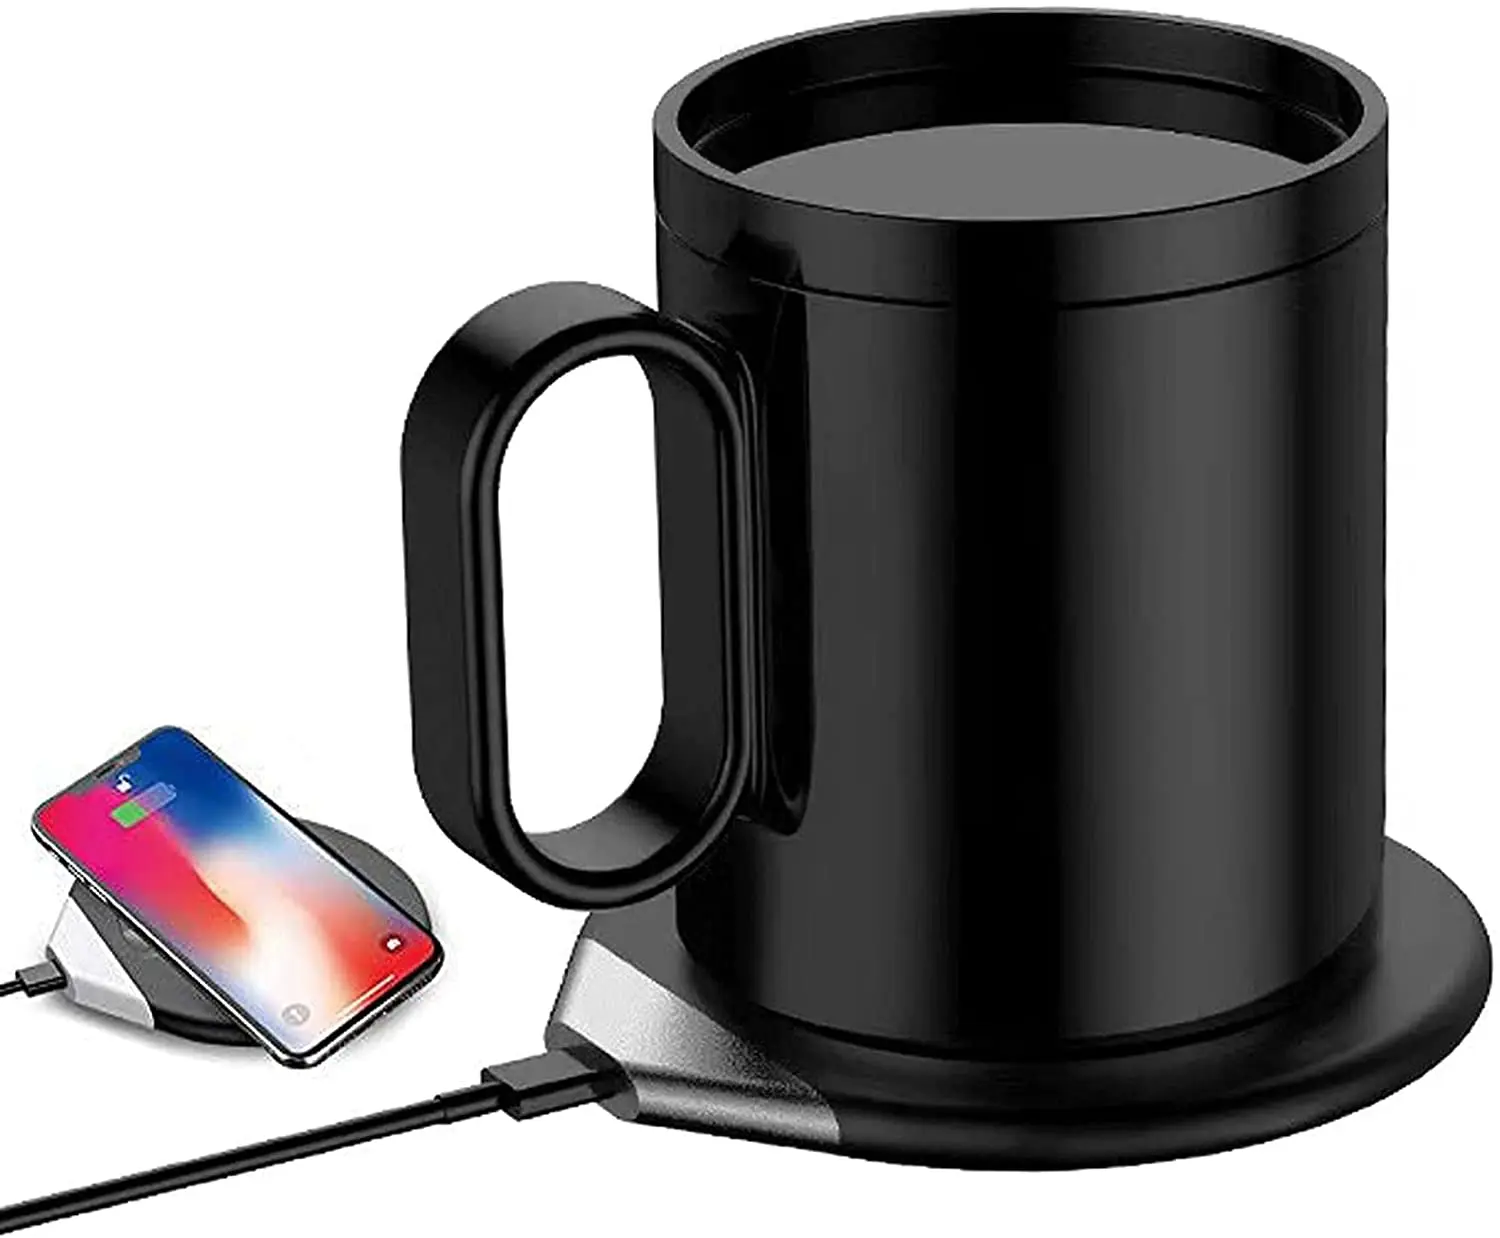 

USB Mug Warmer with Wireless Charger 2 in 1 Coffee Mug Warmer Office Home Beverage Mug Constant Temperature Coffee Cup Warmer, Black, white